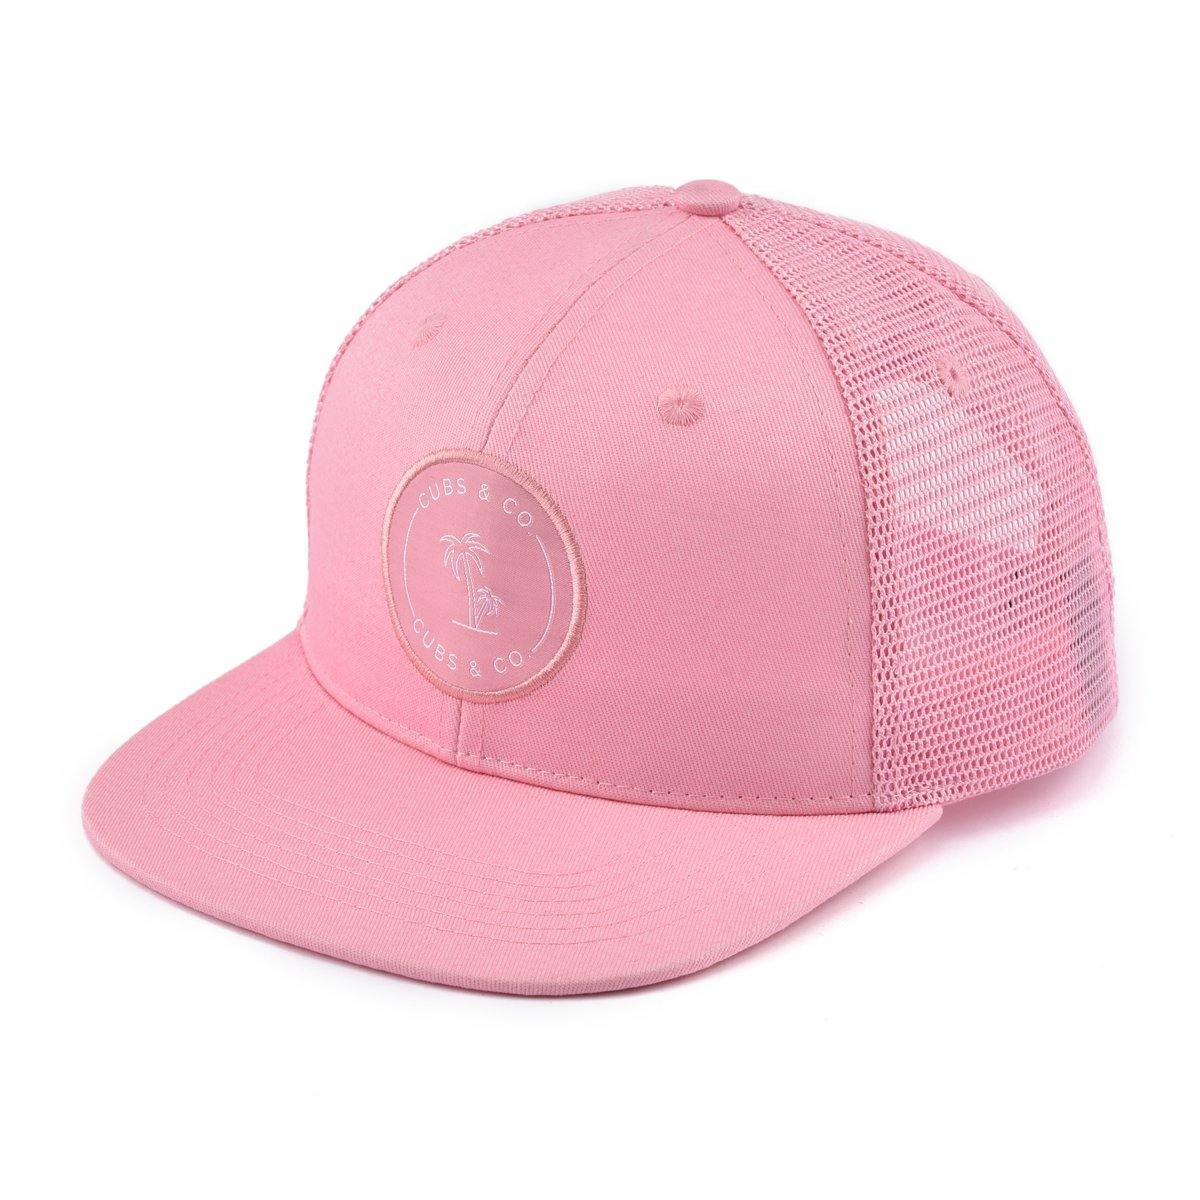 Pink trucker hat for babies, toddlers, kids and women. Cubs & Co. Australia